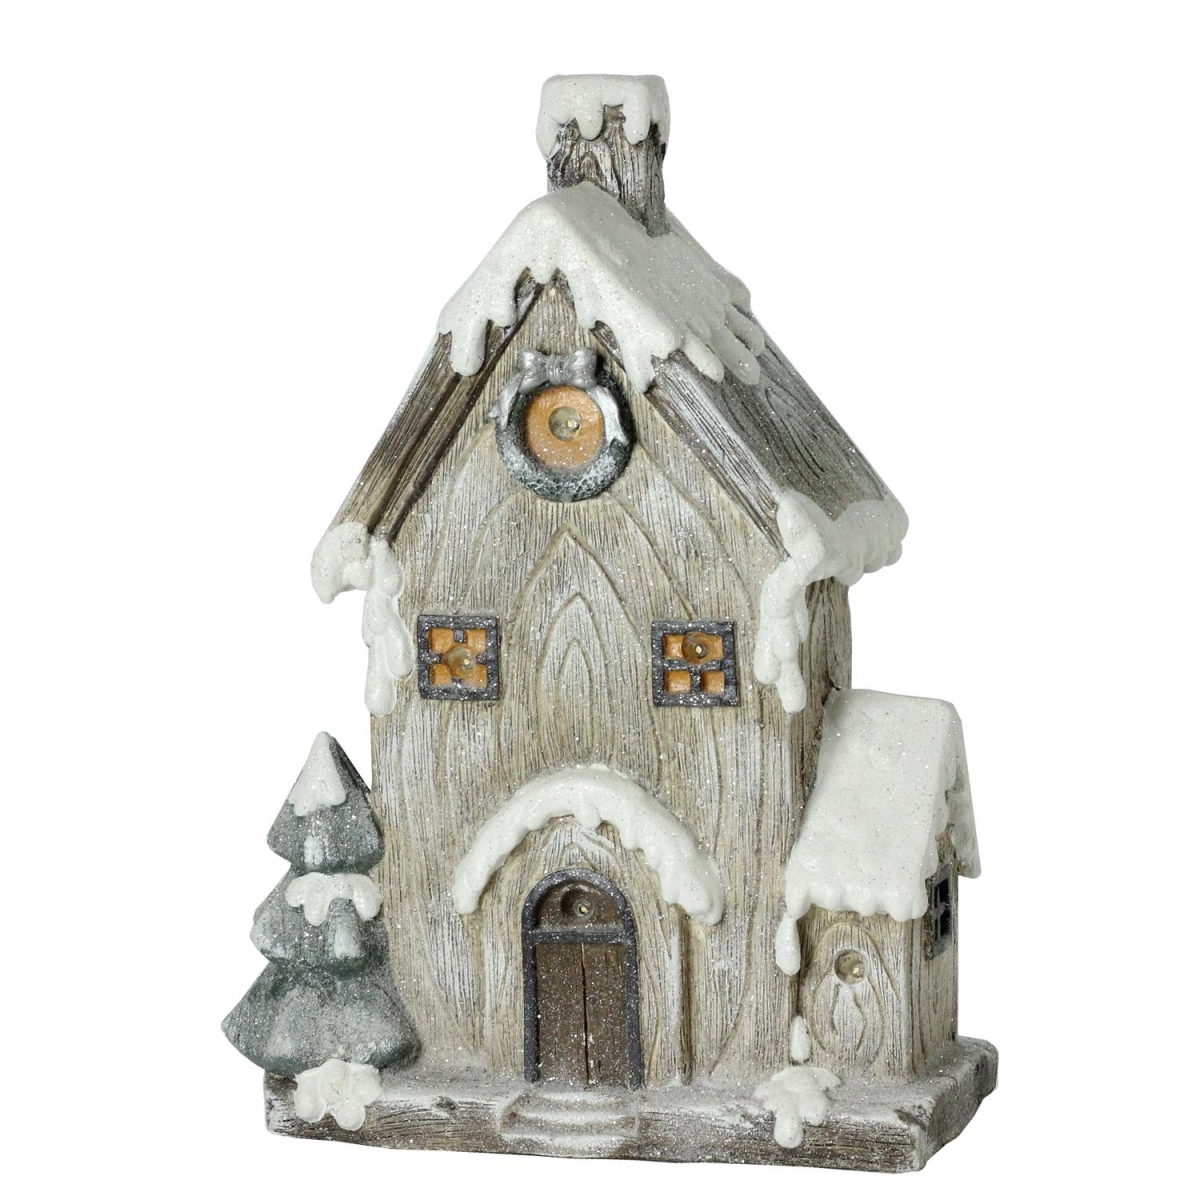 32633480 30 In. Led Lighted Battery Operated Rustic Glittered House Christmas Decoration